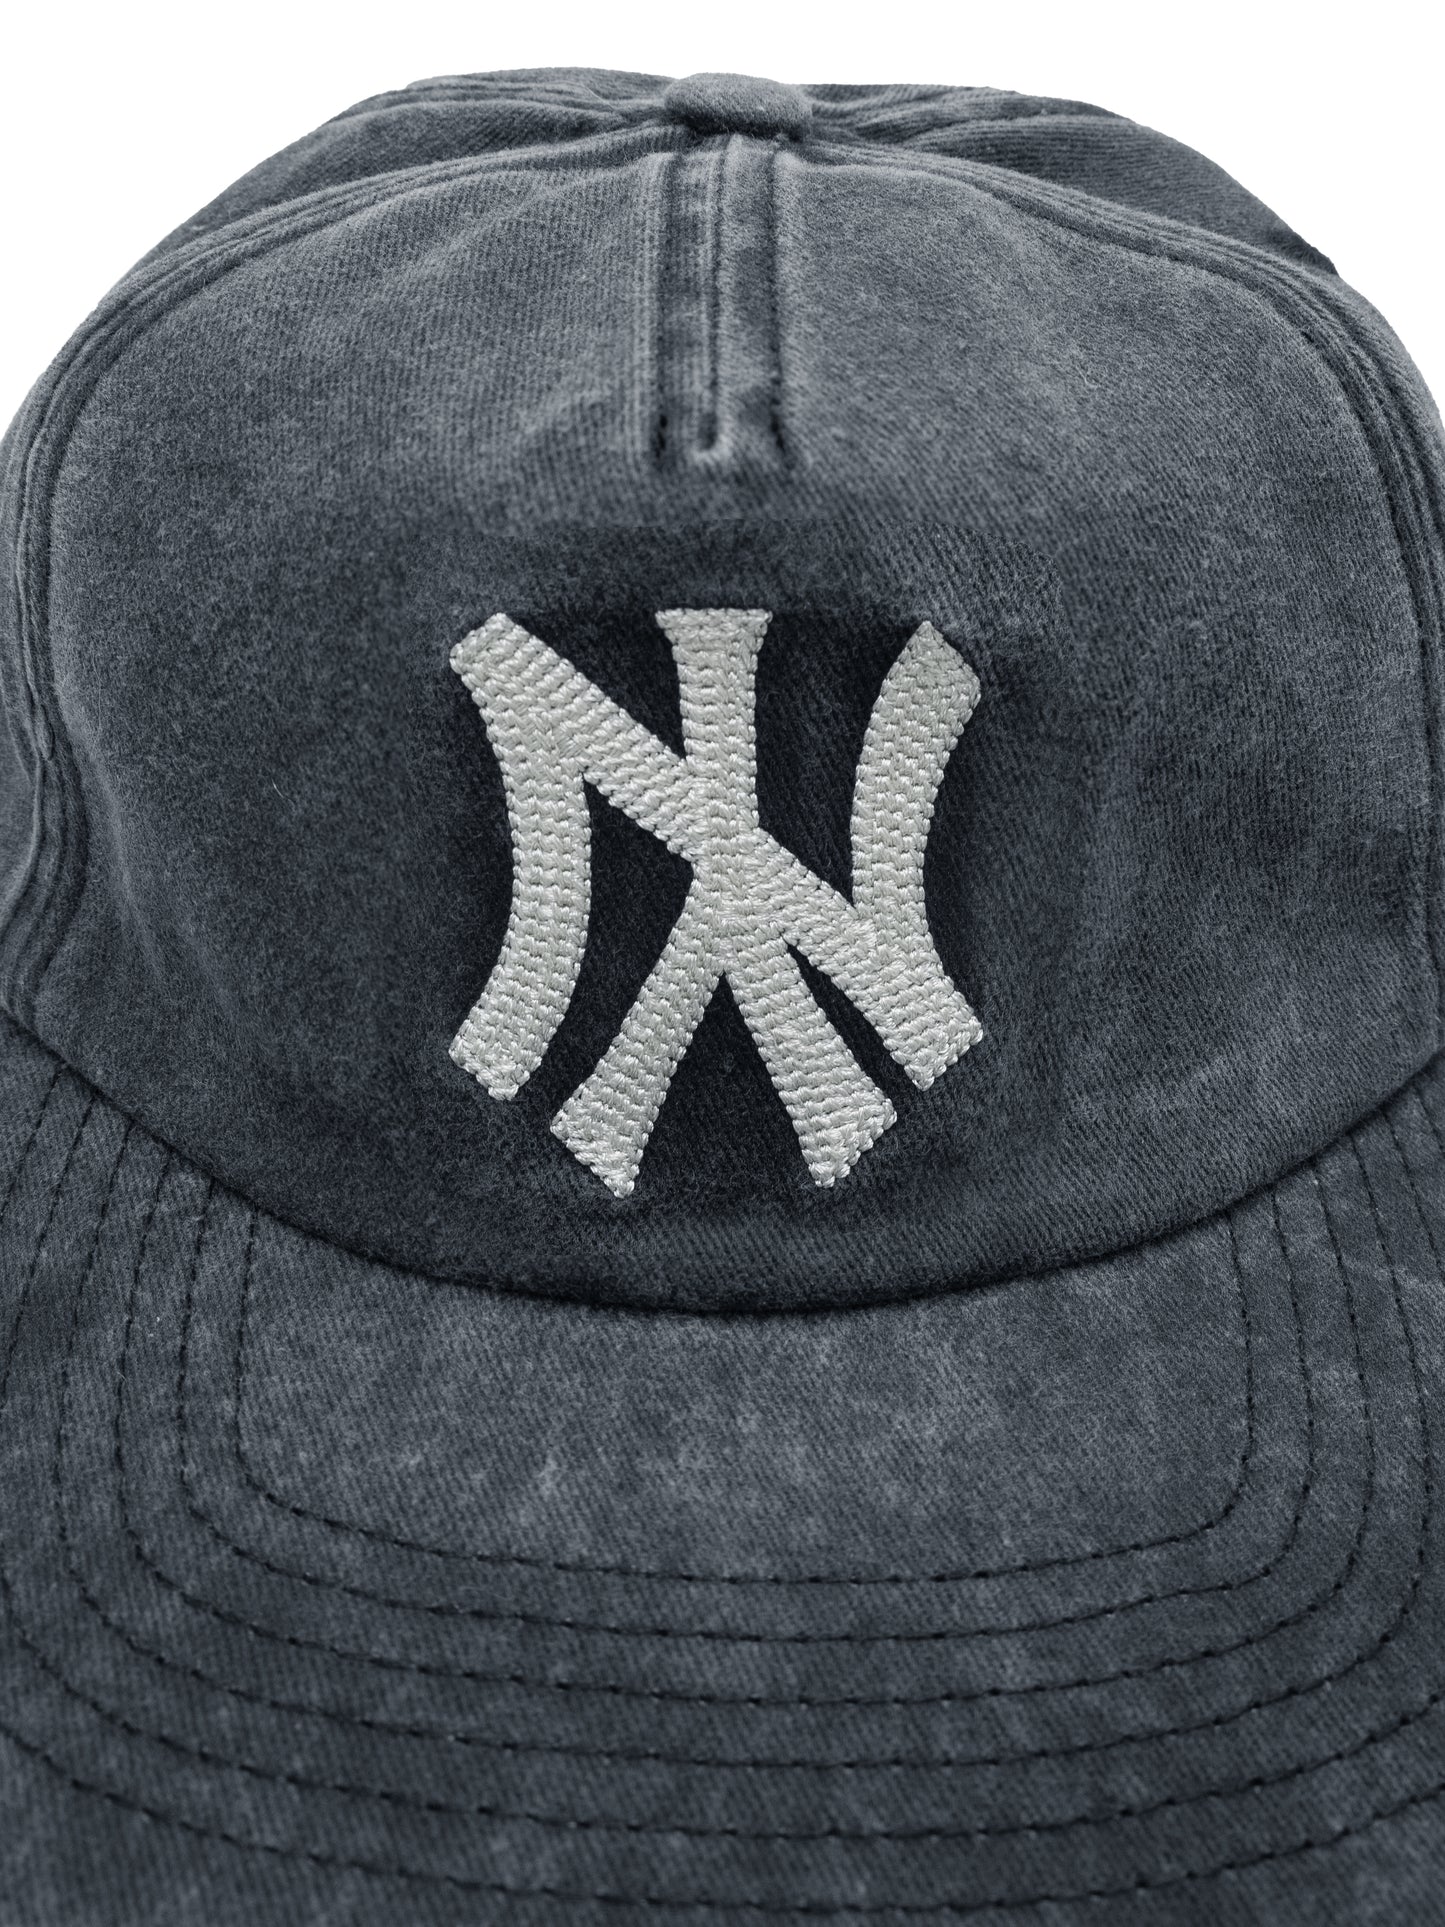 Classic Charcoal Upside Down NYC Hat